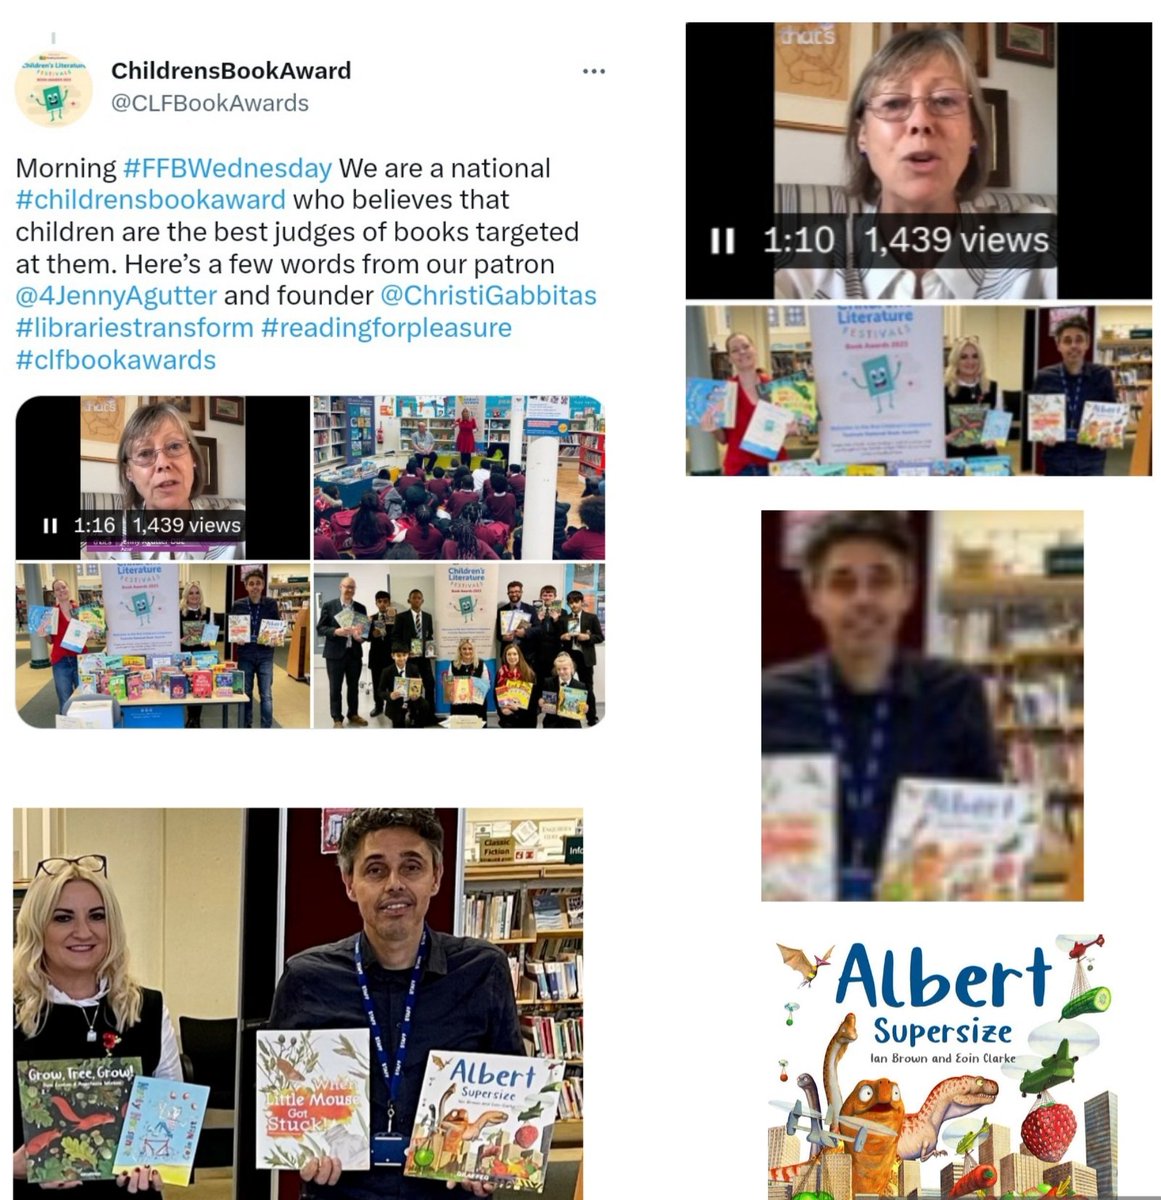 Thrilled to be part of the Children’s Literature Festival @CLFBookAwards supported by brilliant #CalltheMidwife actress @4JennyAgutter with our #ALBERTthetortoise #picturebook ALBERT SUPERSIZE. AlbertTortoise.com
#bookseries #bookaward #illustrations #tortoise #storytime